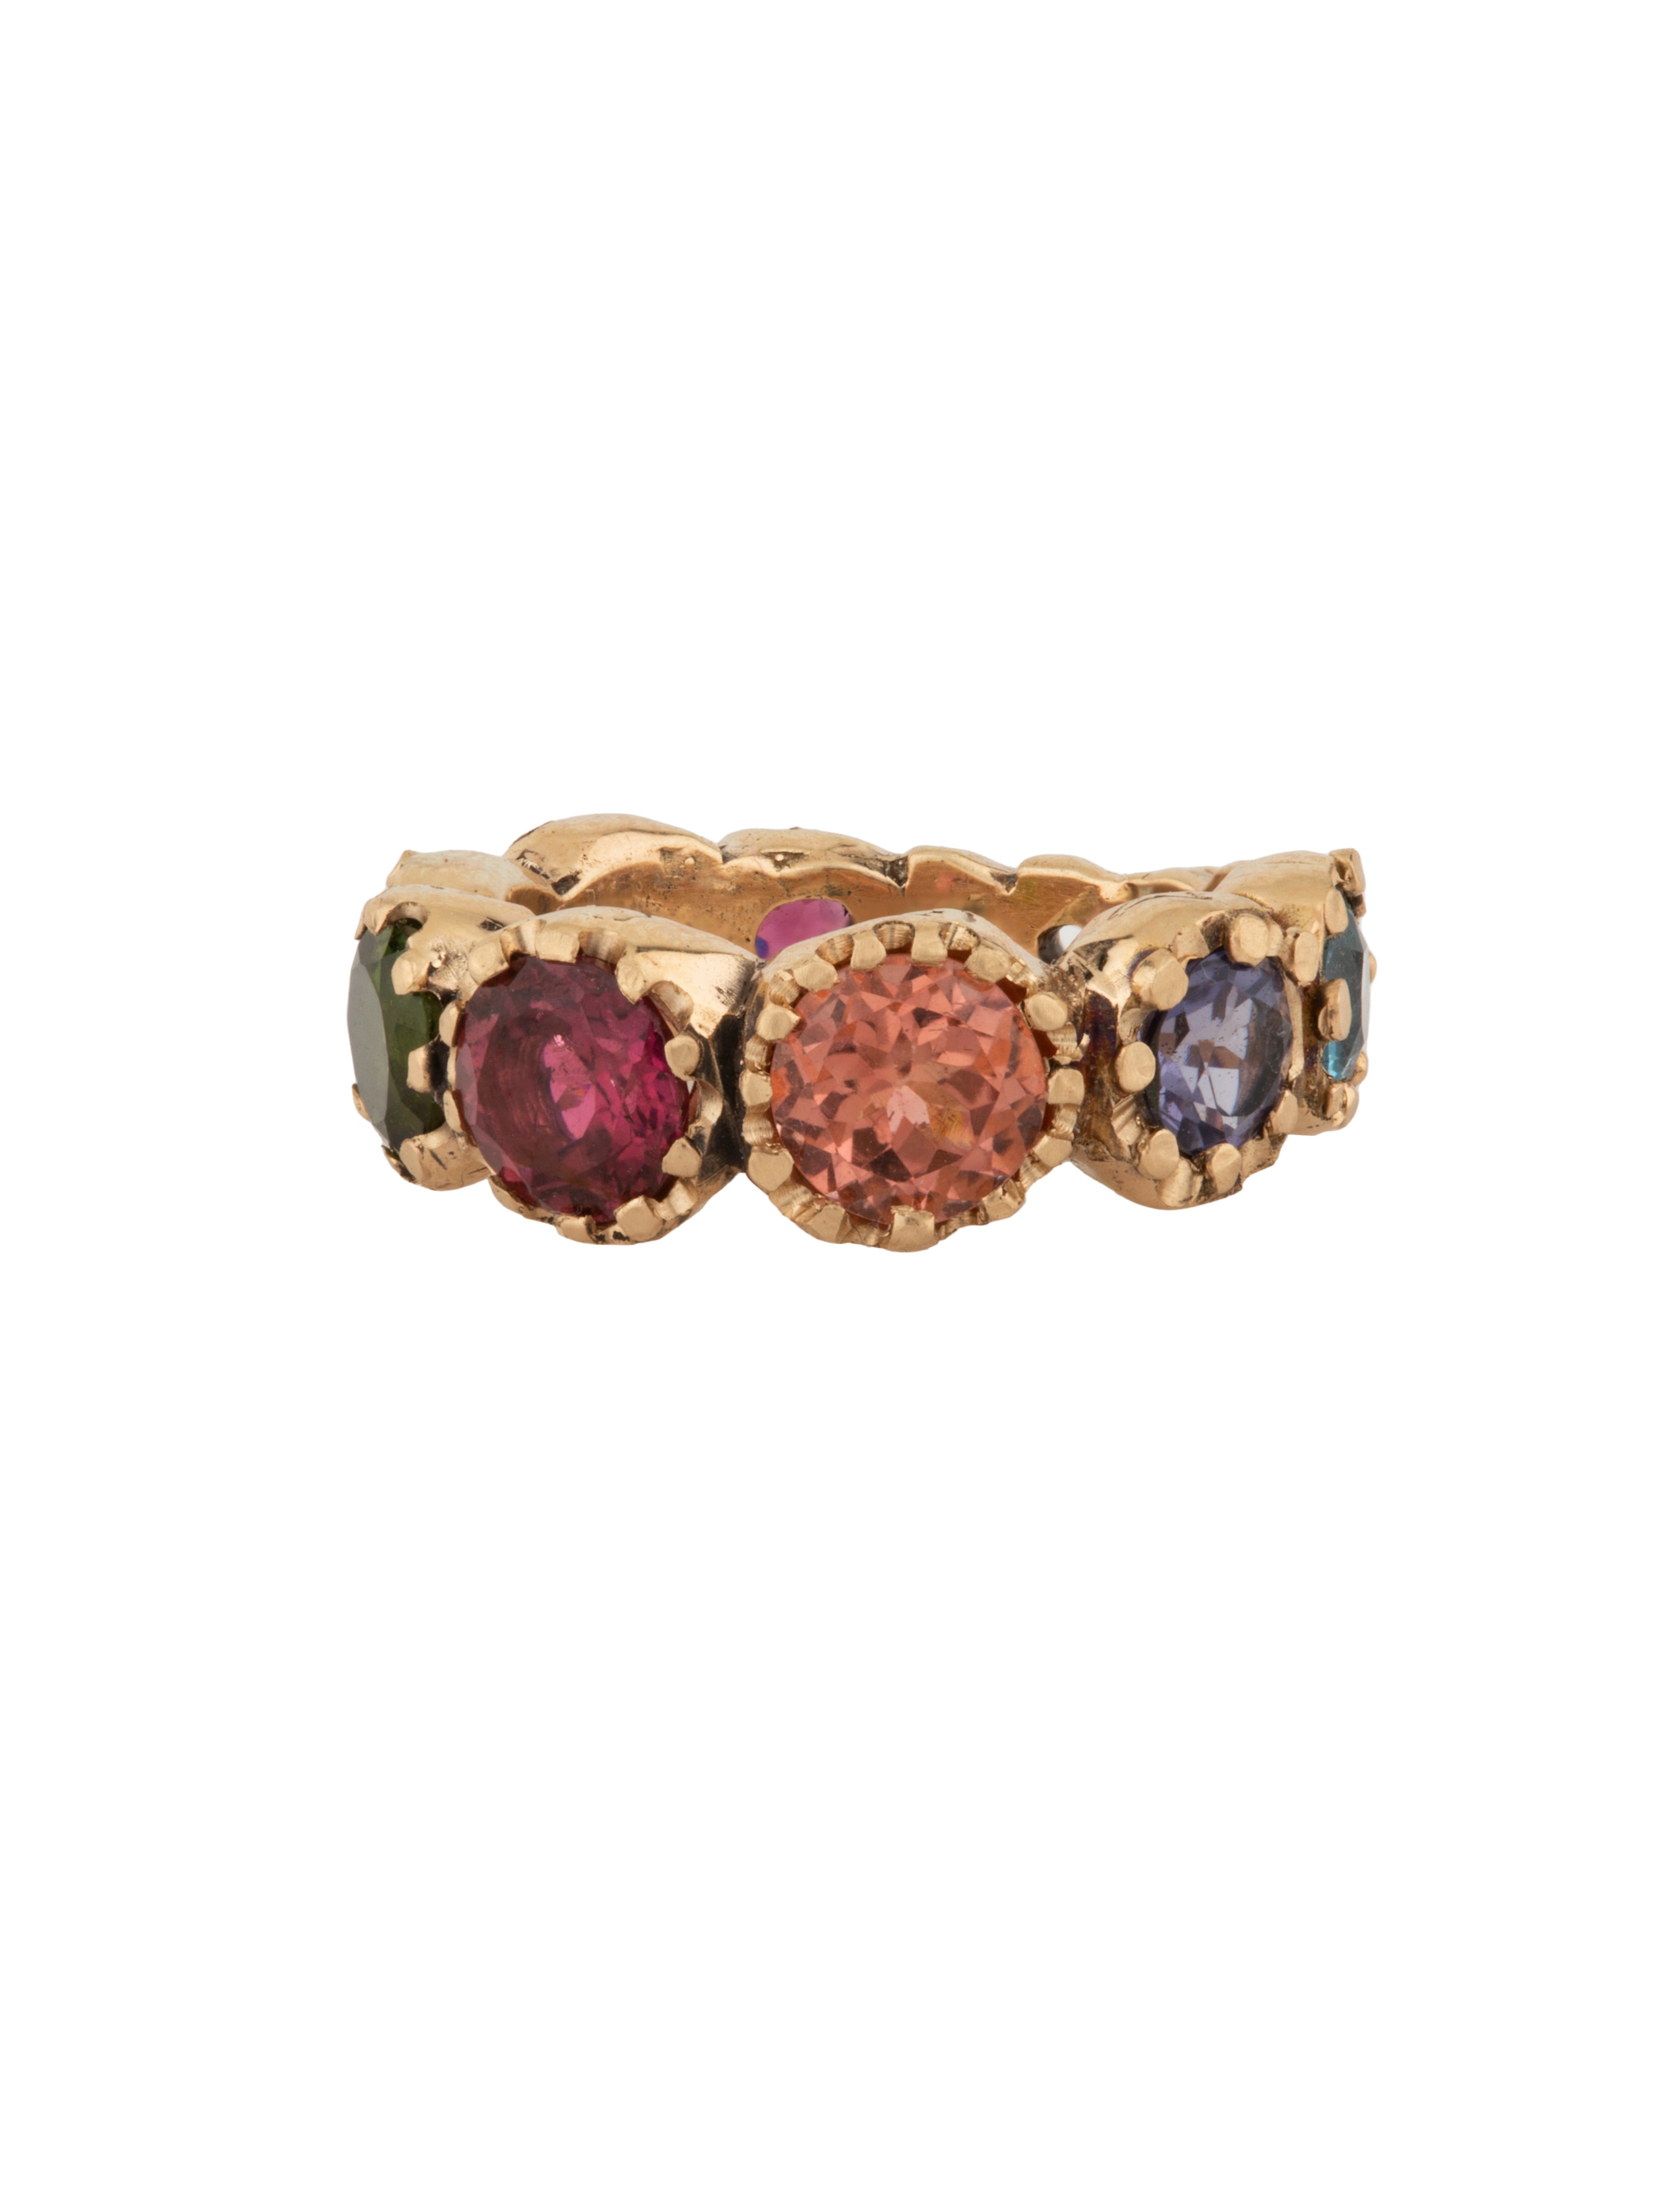 Reign of Beauty Ring